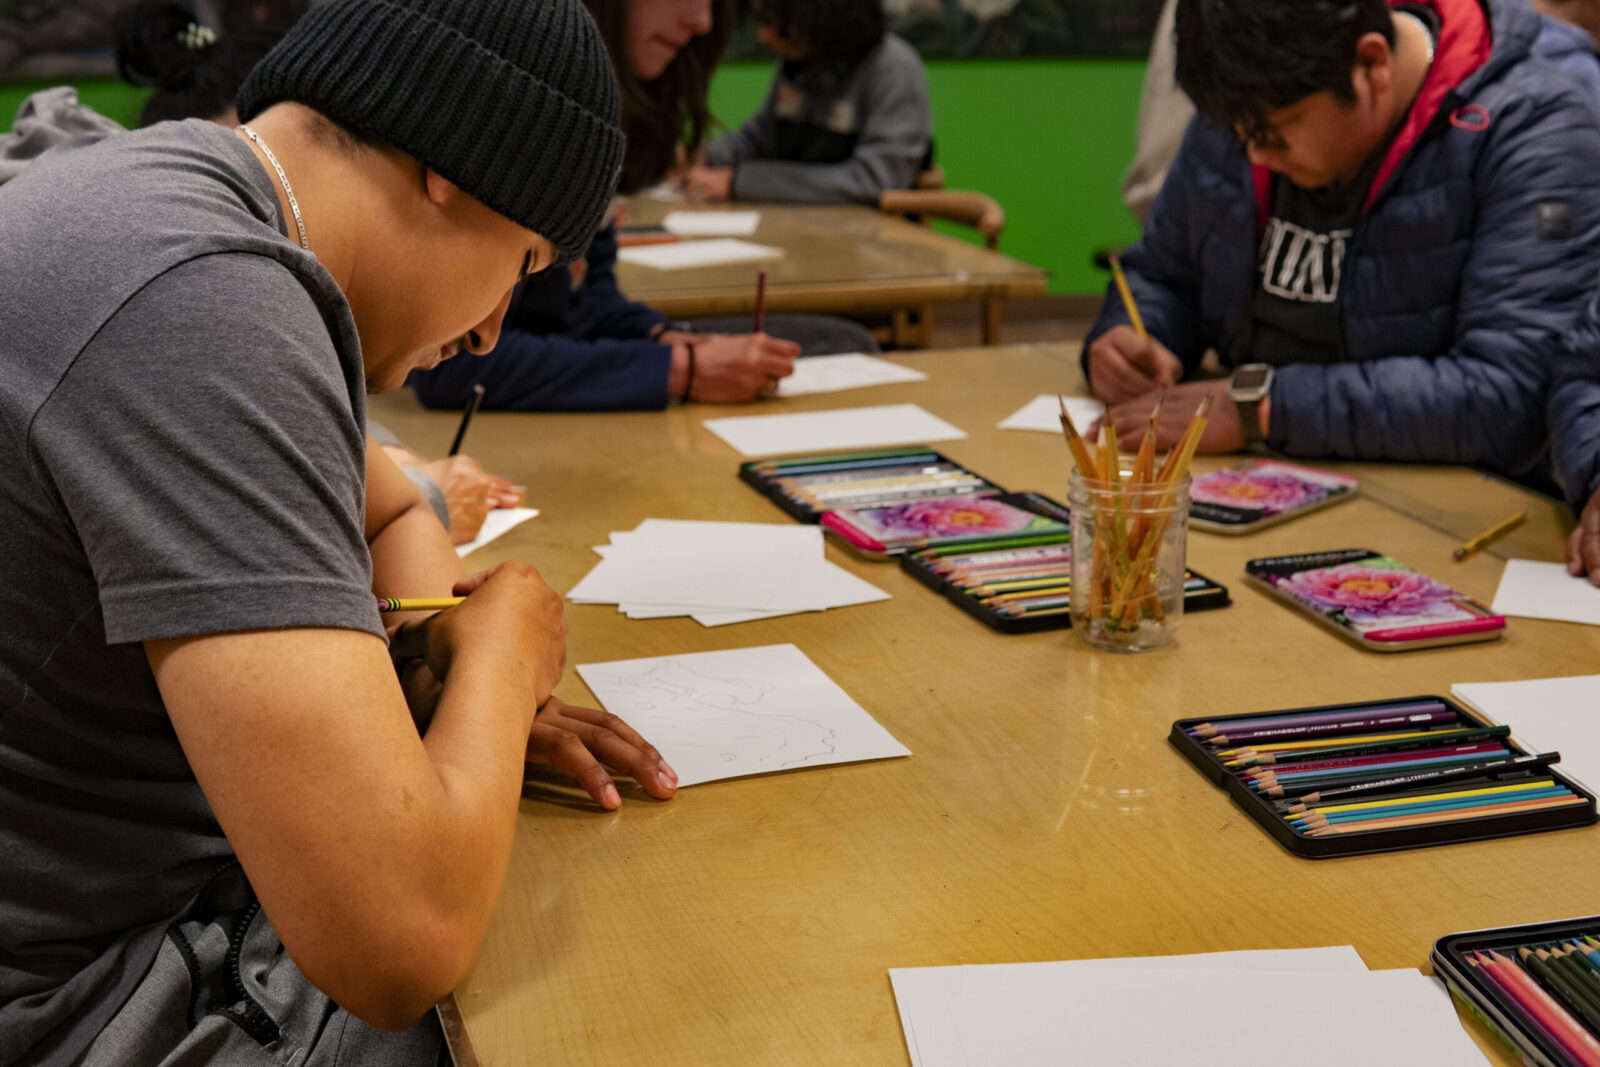 Participants create their own artwork reflecting values important to them or their community.